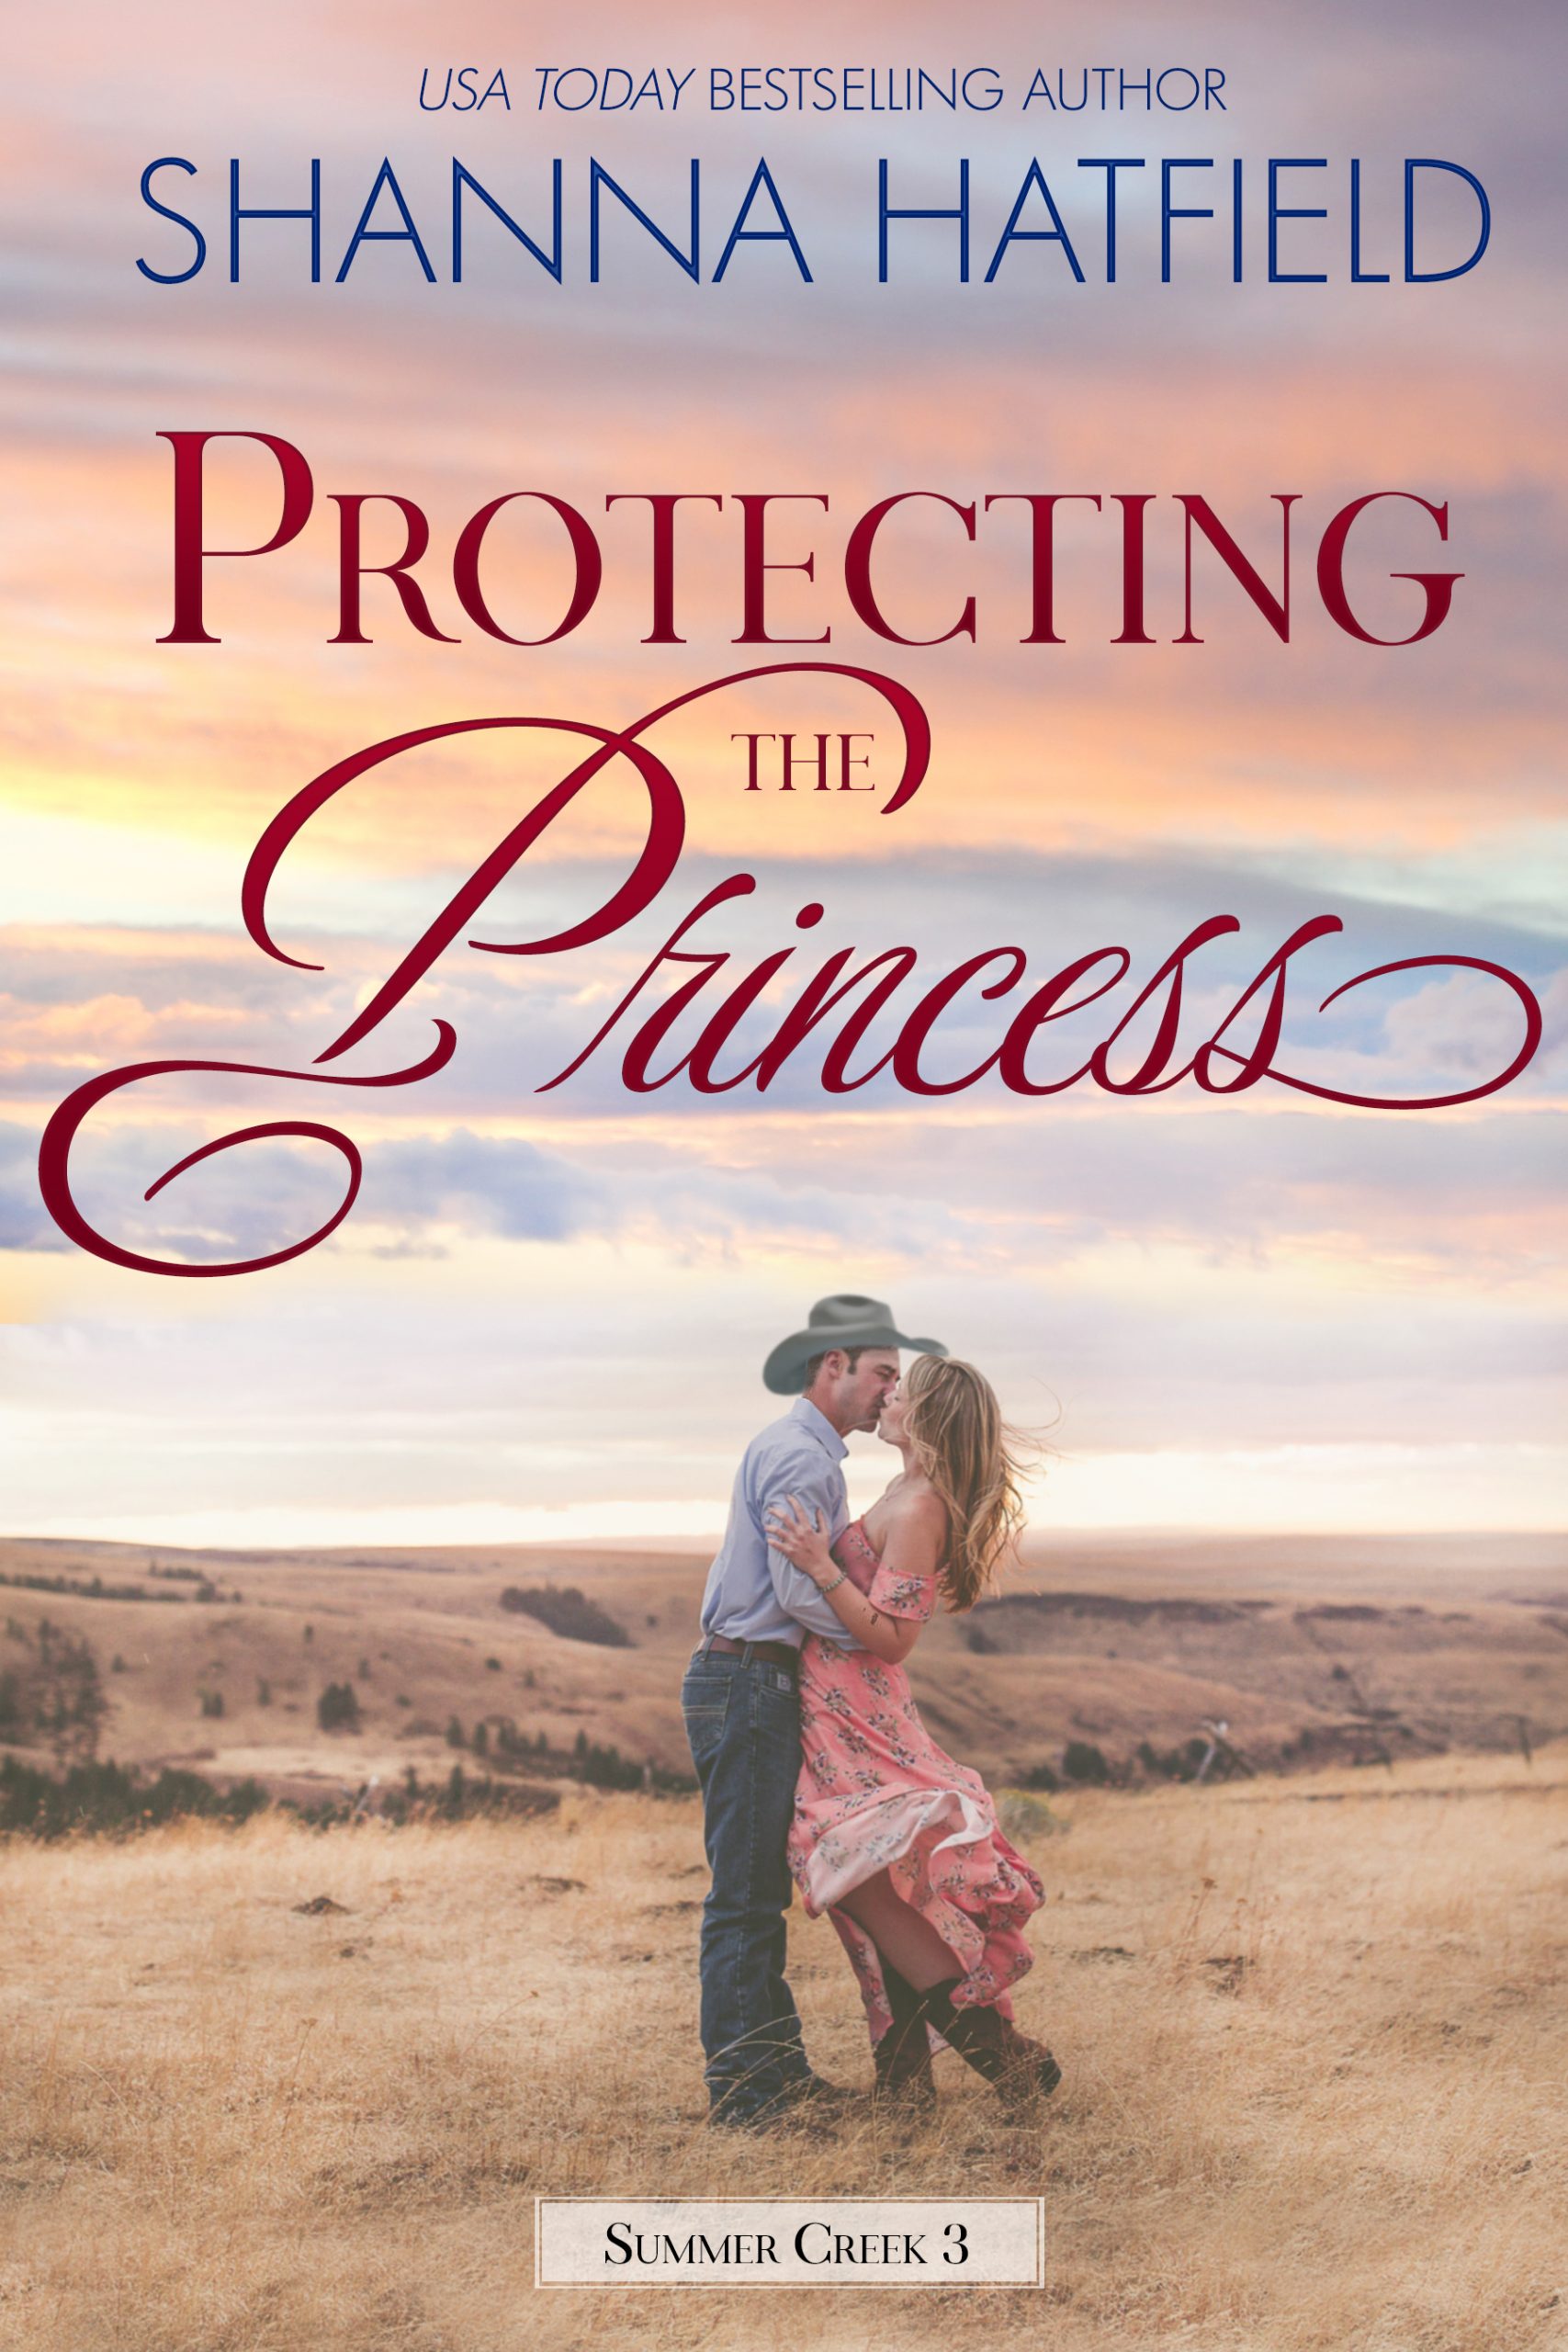 Protecting-the-Princess-scaled